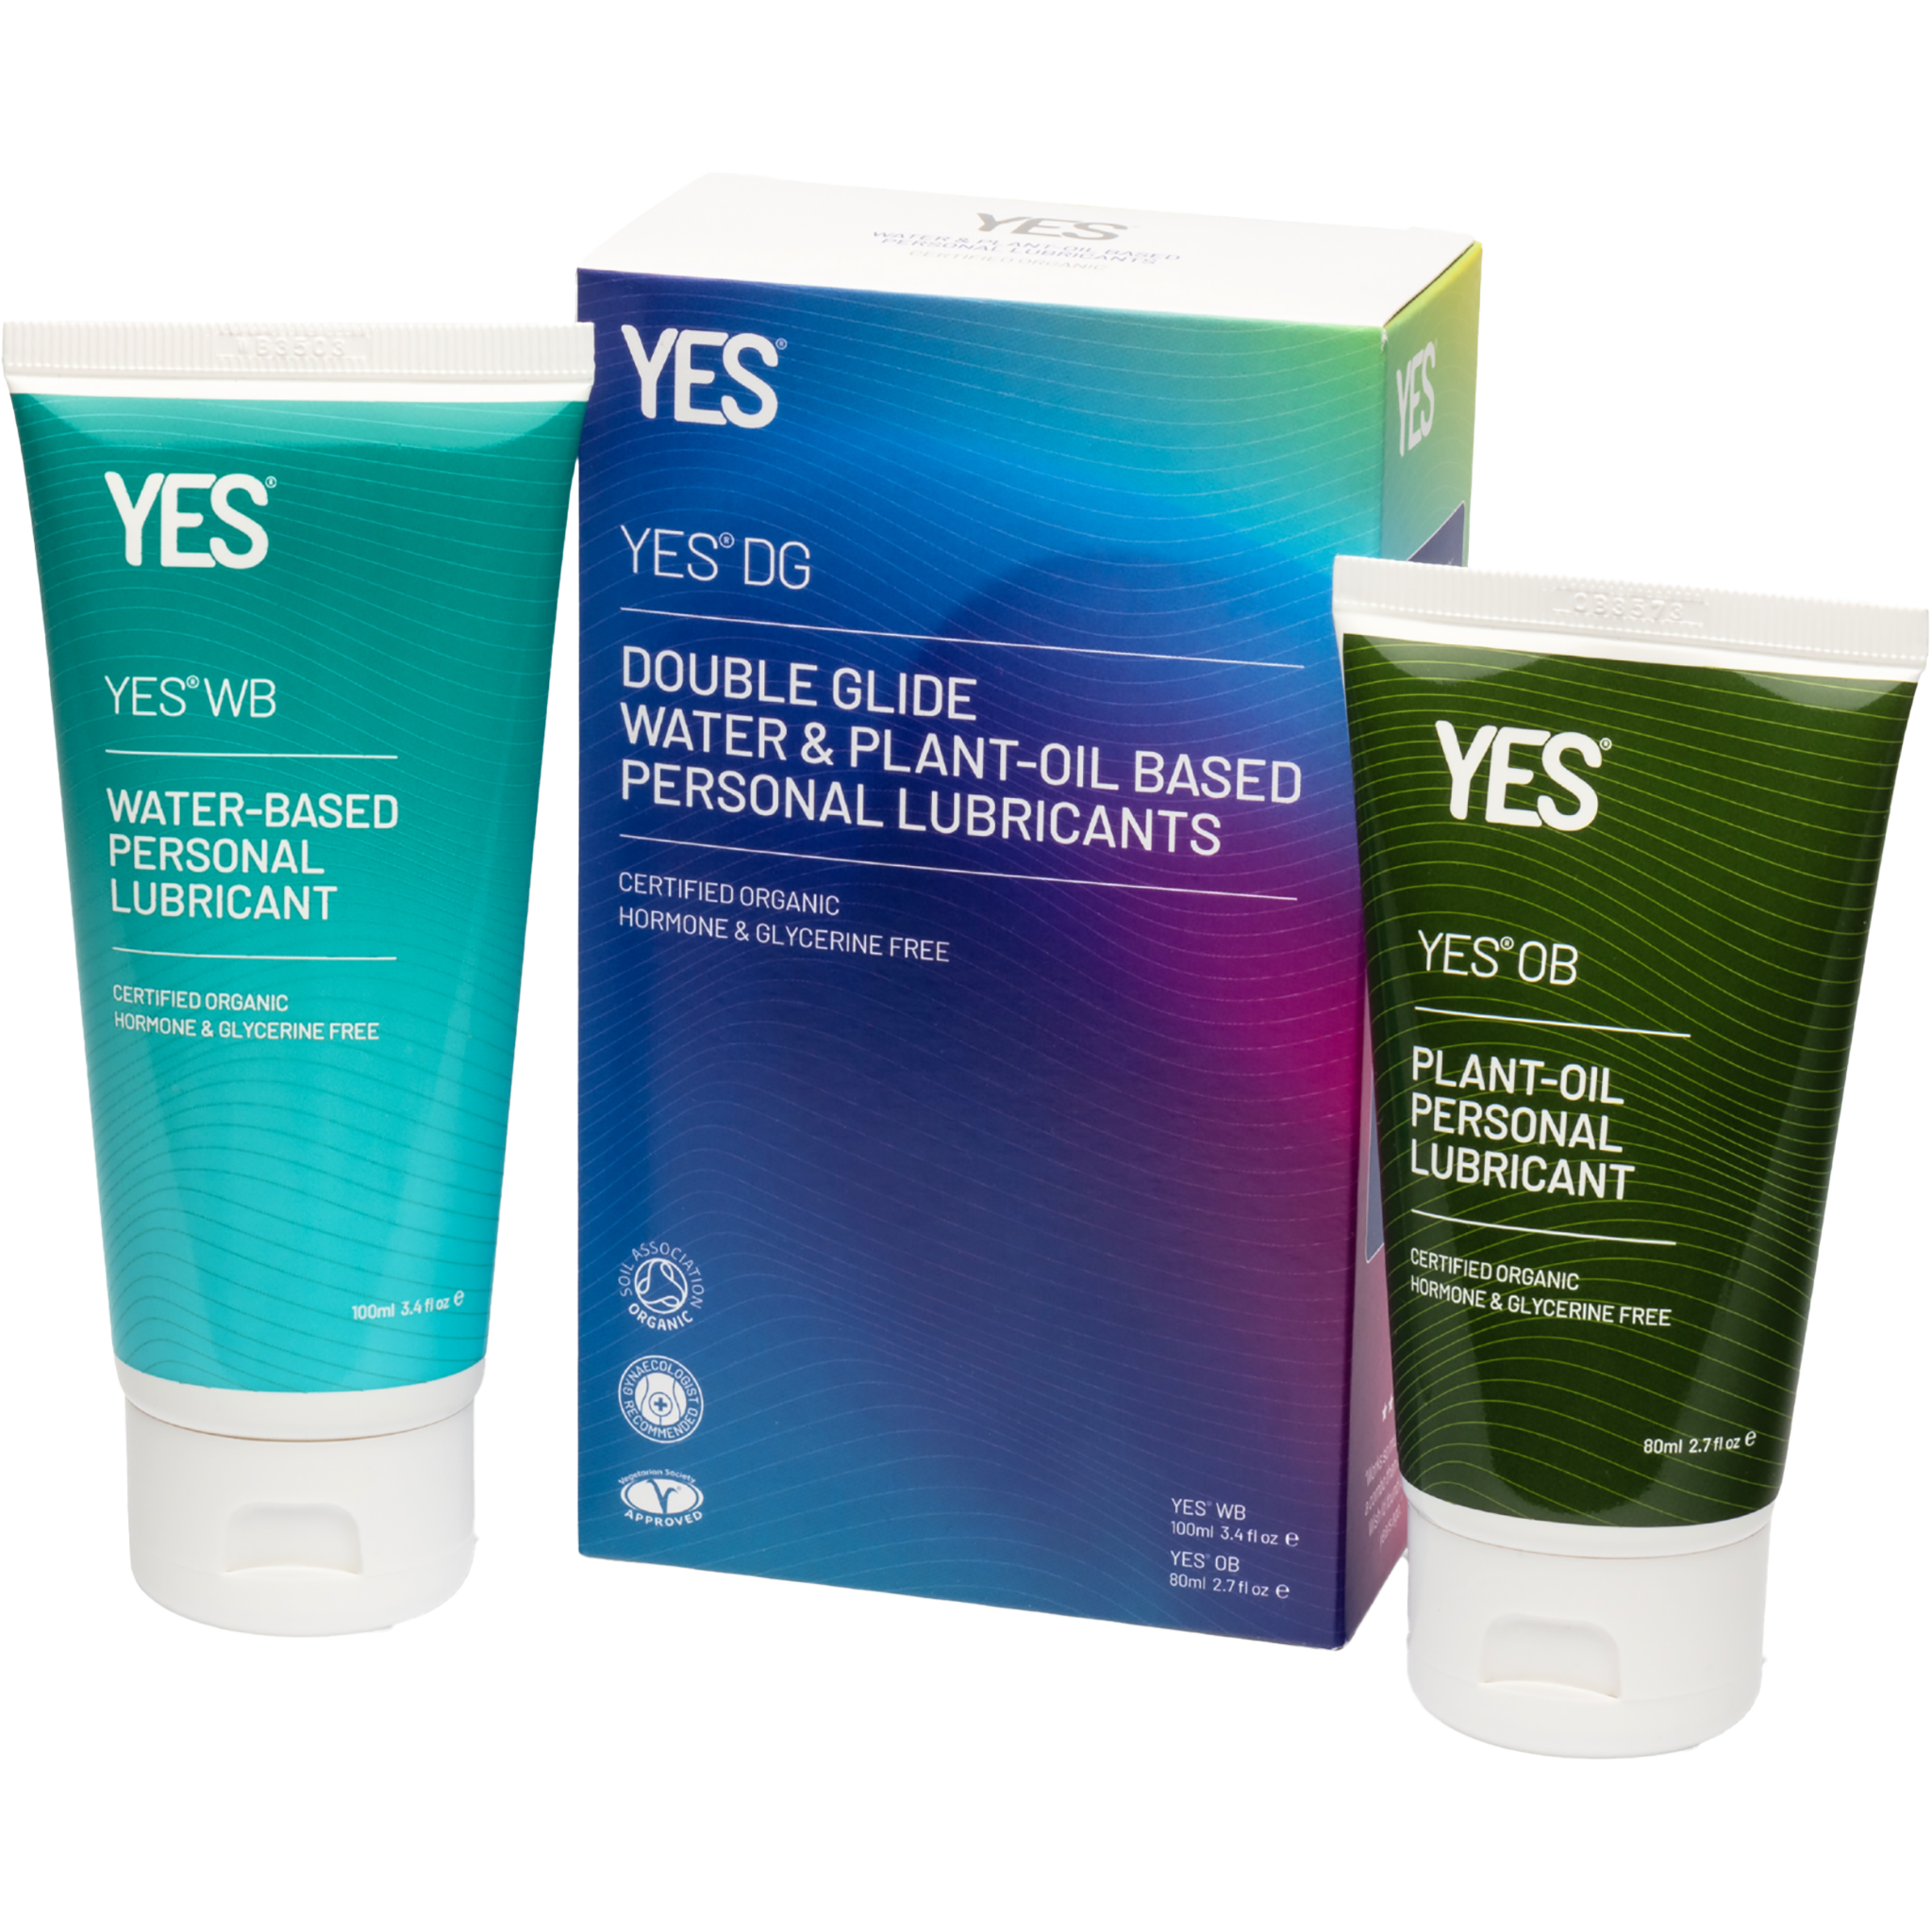 Double Glide Water & Plant Based Personal Lubricants